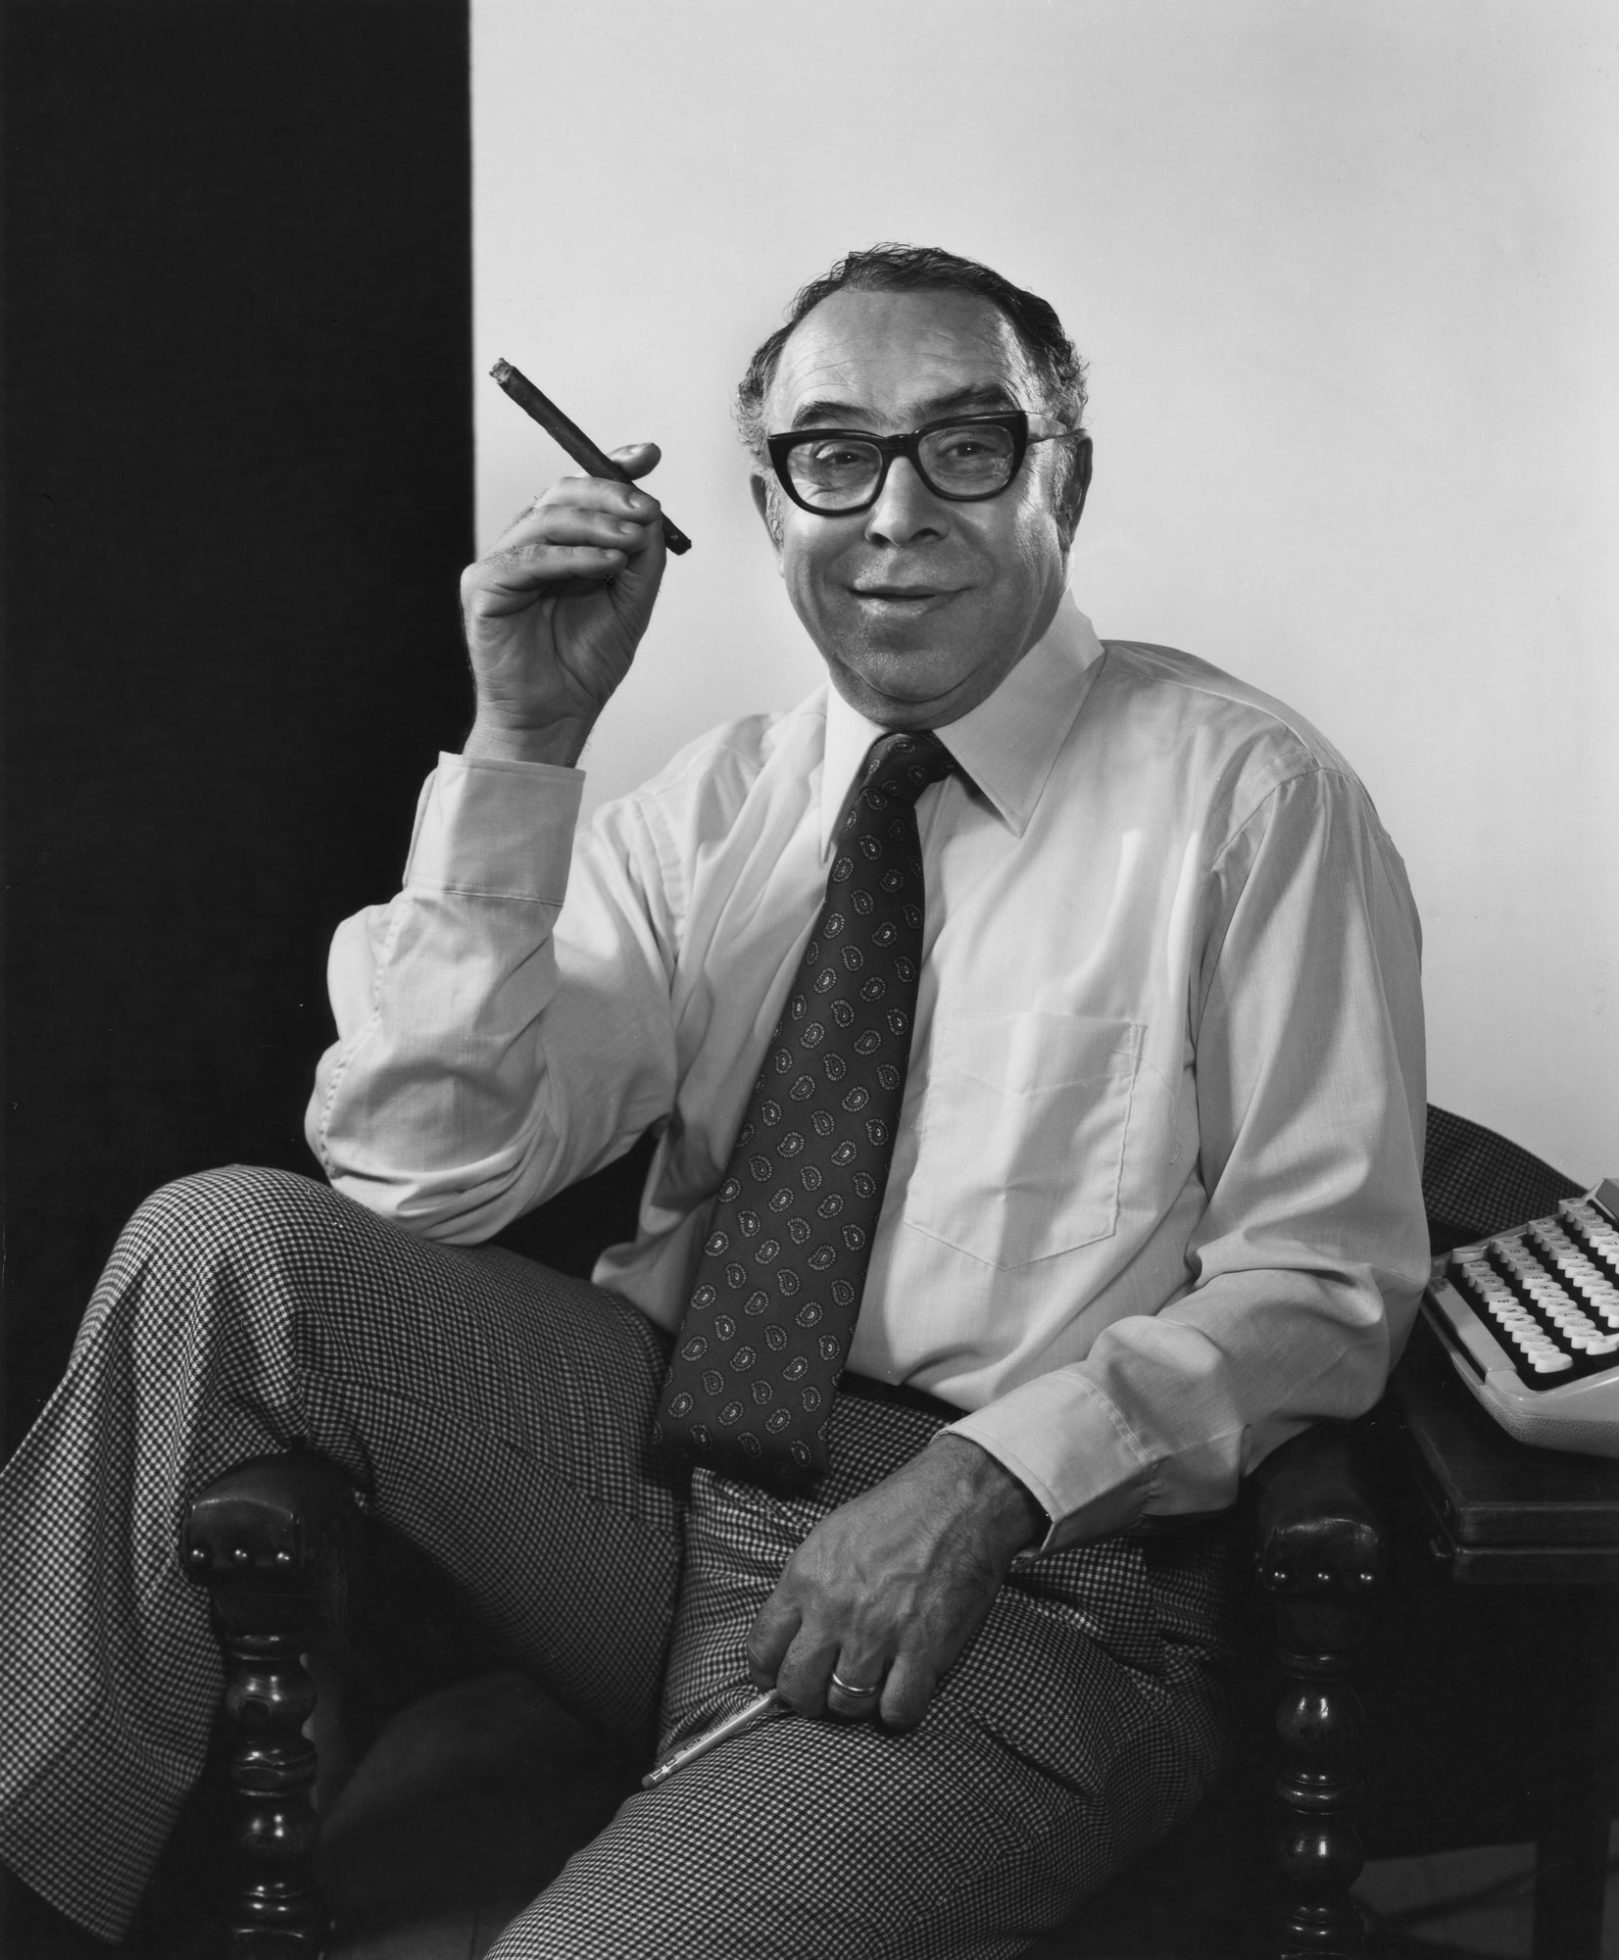 Yousuf Karsh photographed Buchwald in 1960. Courtesy of the Karsh Estate  © Yousuf Karsh and link to karsh.org.